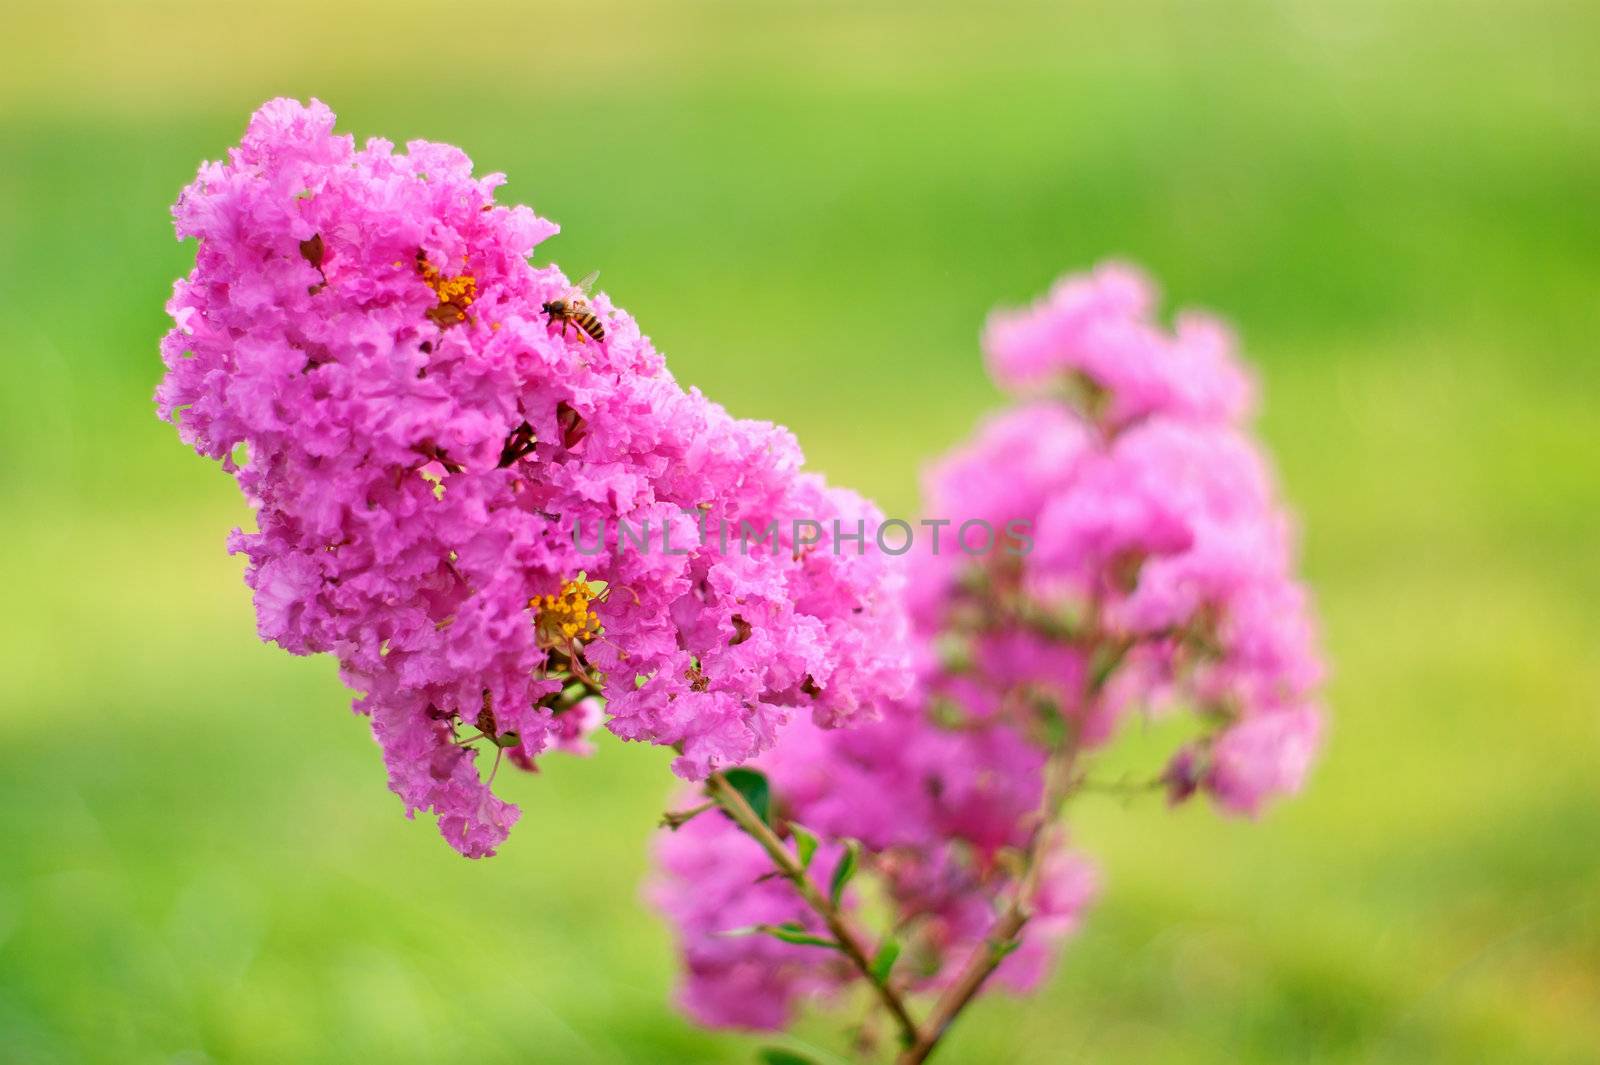 Crape myrtle flowers isolated on a green background